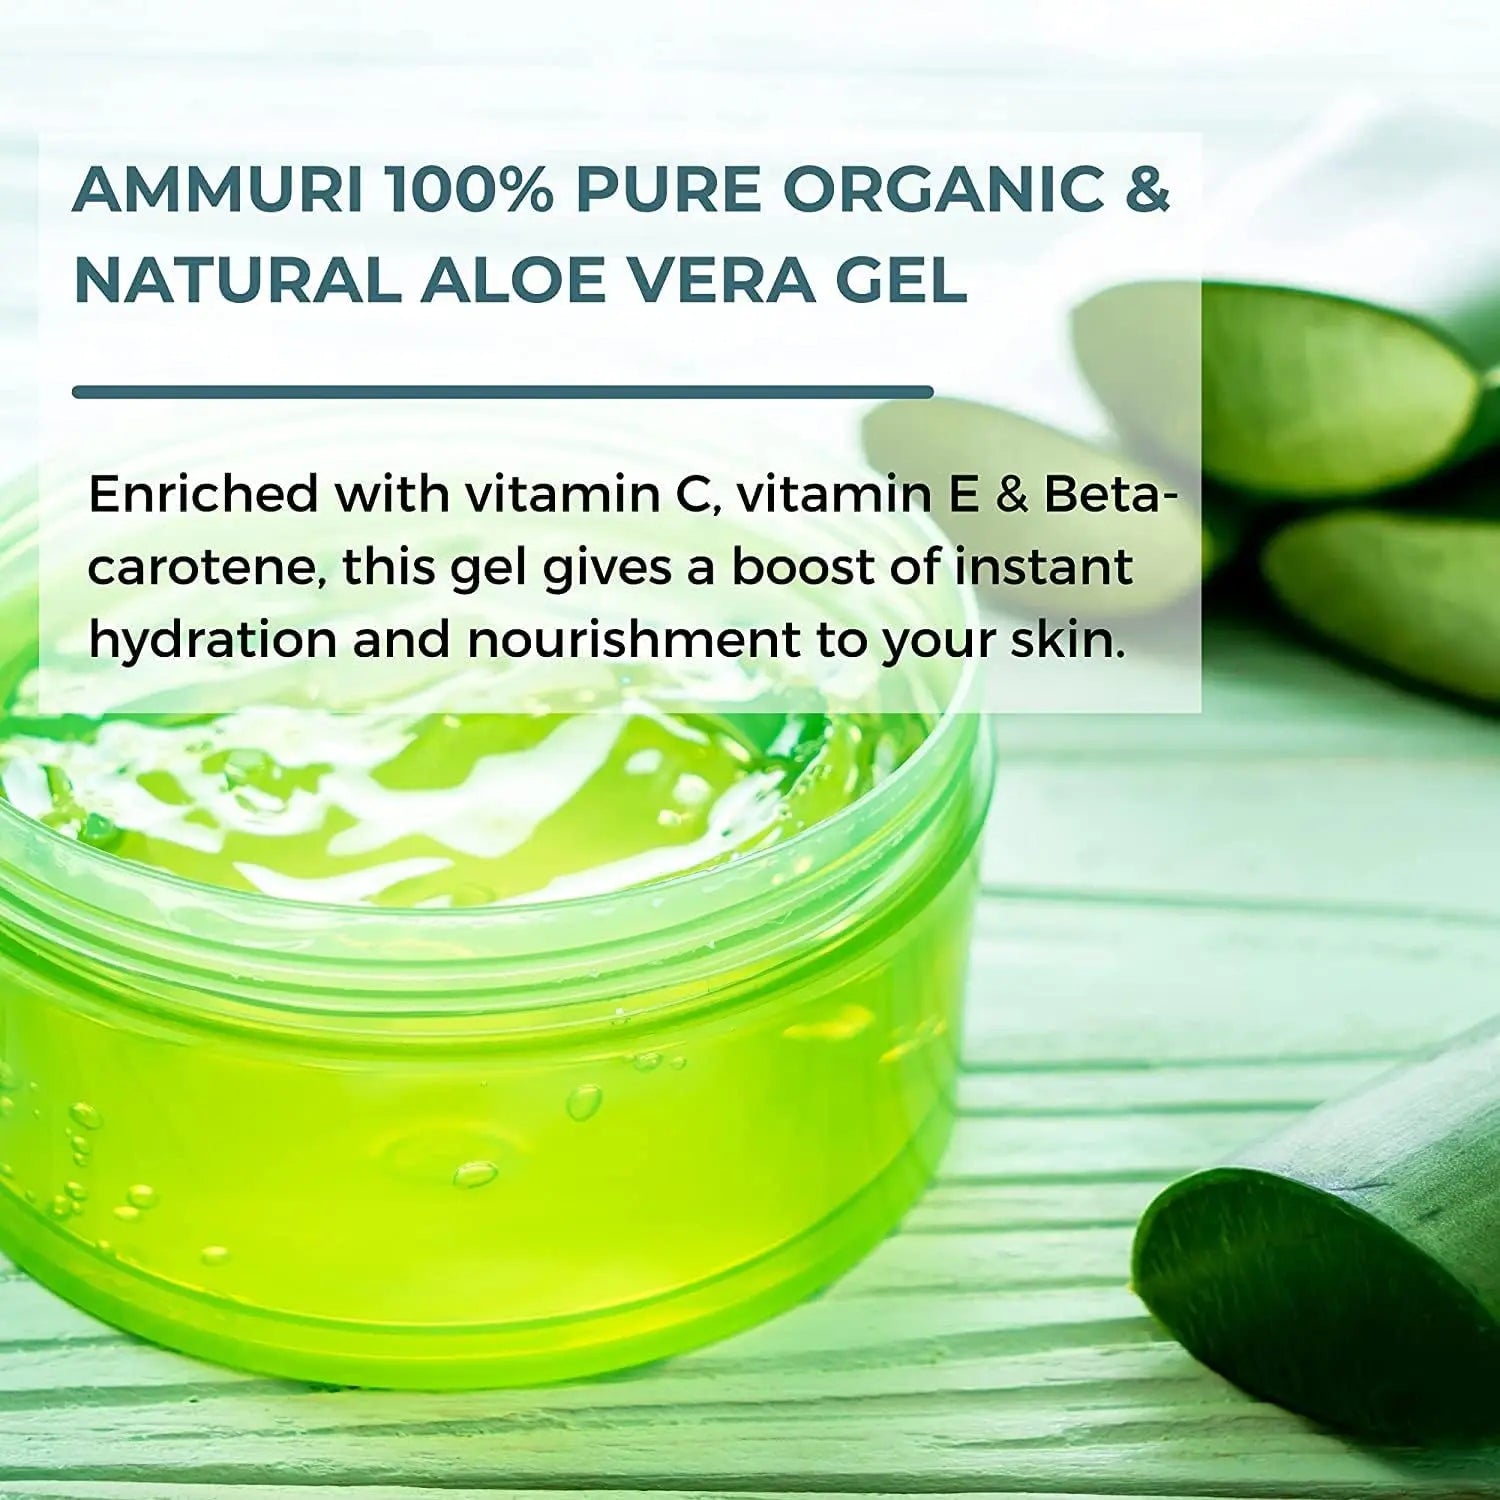 Pure Aloe Vera Gel, 100% Organic Aloe Vera Gel for Face Care, Hair Care, Body Care for Skin Soothing, Acne Scar Treatment and Dry Scalp Treatments - Ammuri Skincare